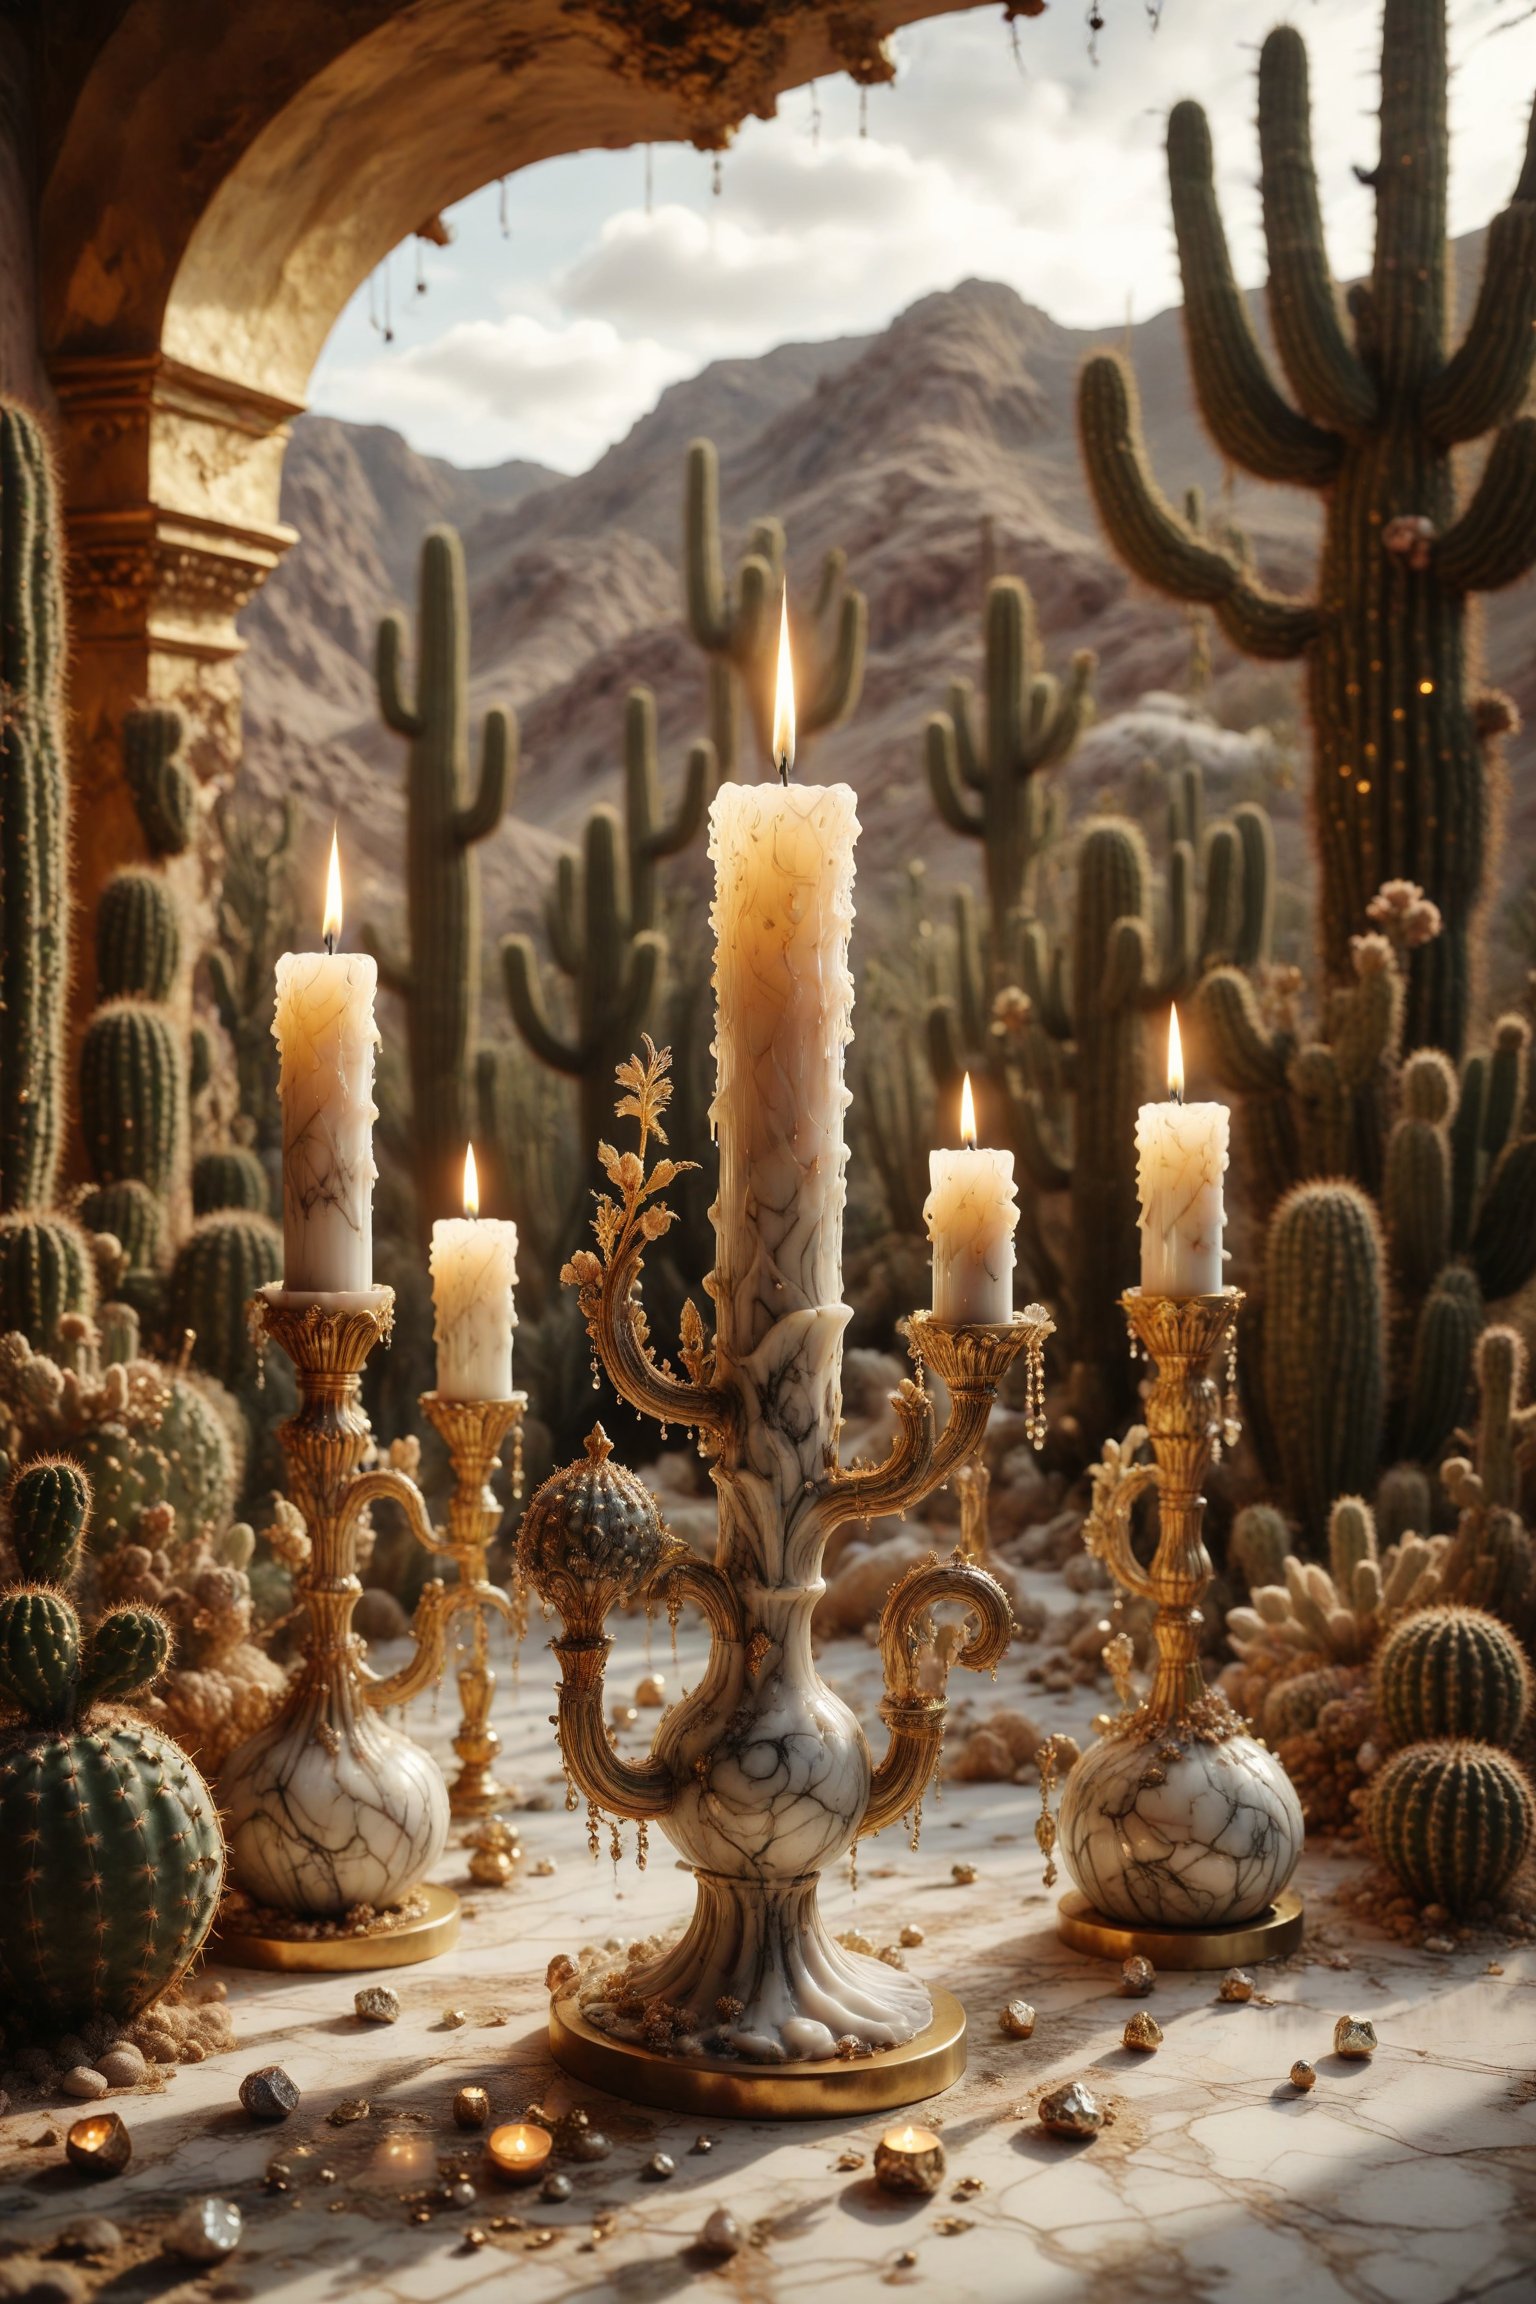 A candle with marble texture and interesting, surreal organic curves, in a surreal desert with cacti illuminated by golden candelabras. Inlaid cacti, decorative gold accents, feathers, diamonds, and iridescent bubbles.